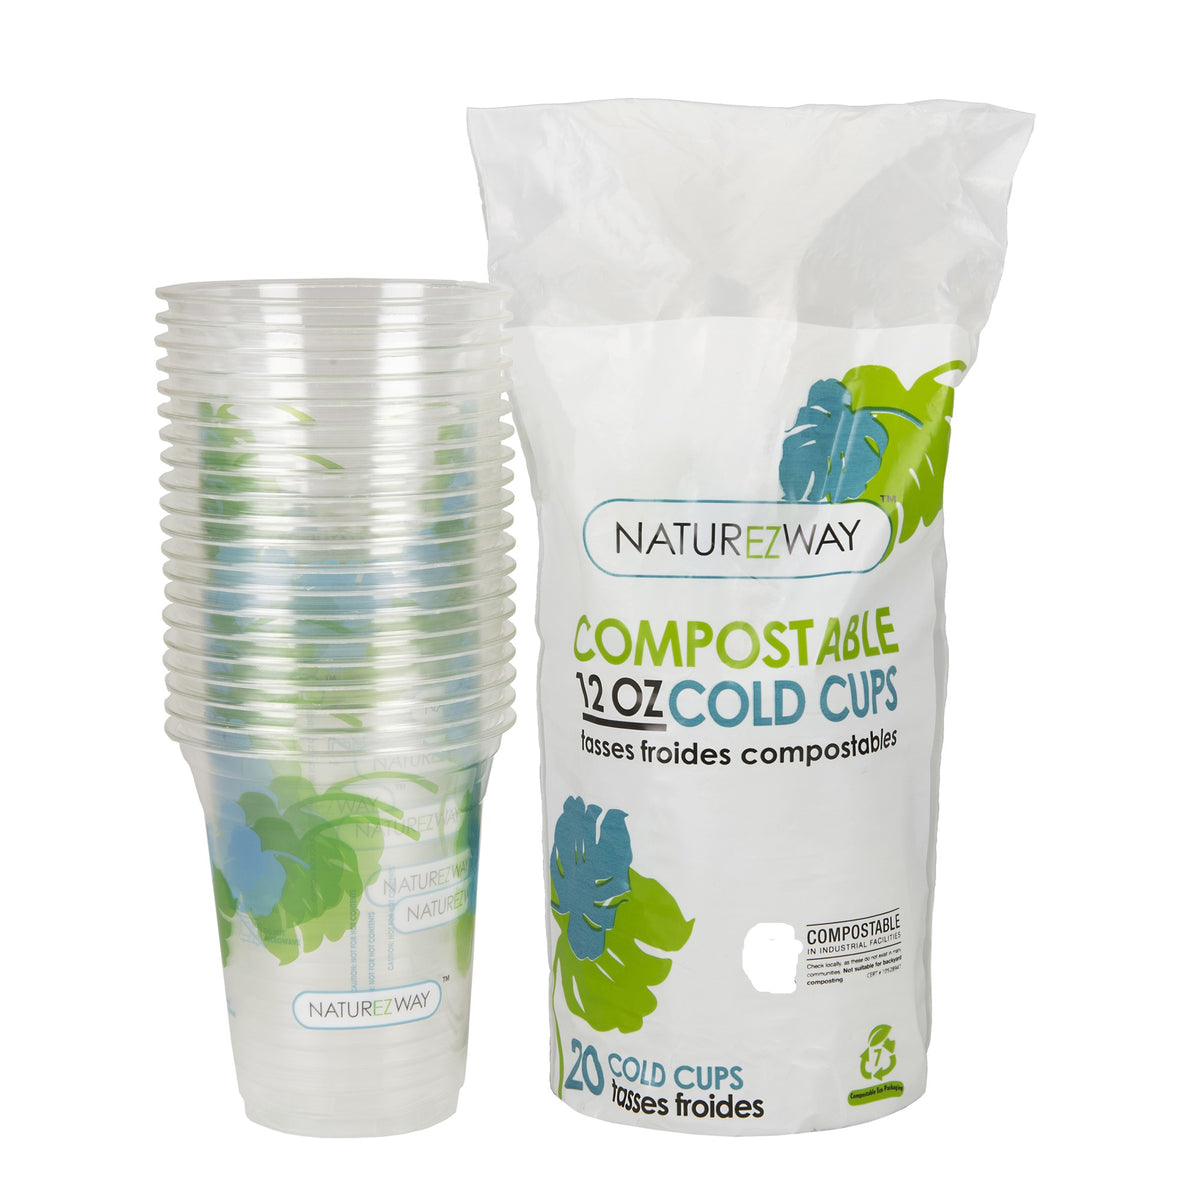 Clear 12 oz Plastic Cups 240 ct